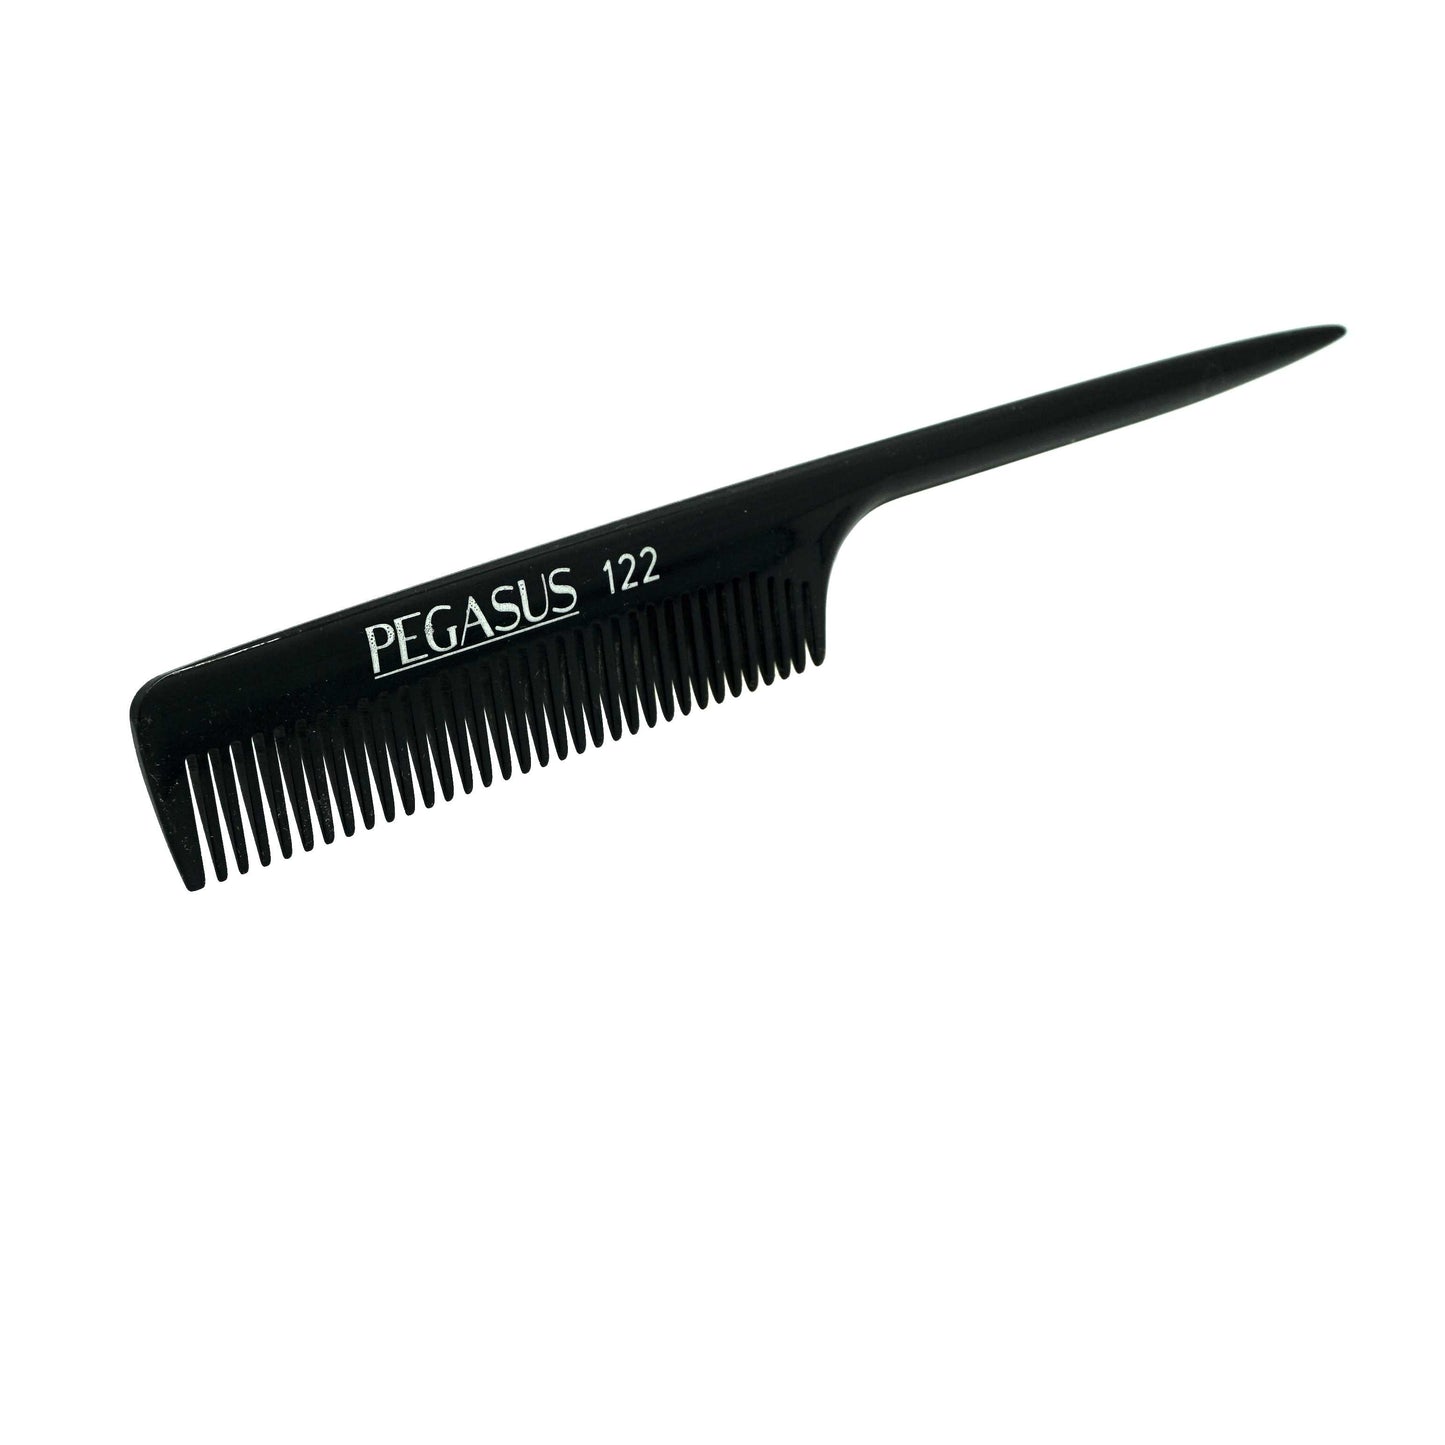 Pegasus 122, 8in Hard Rubber Rat Tail Comb - Course Tooth, Handmade, Seamless, Smooth Edges, Anti Static, Heat and Chemically Resistant, Great for Parting, Coloring Hair | Peines de goma dura - Black